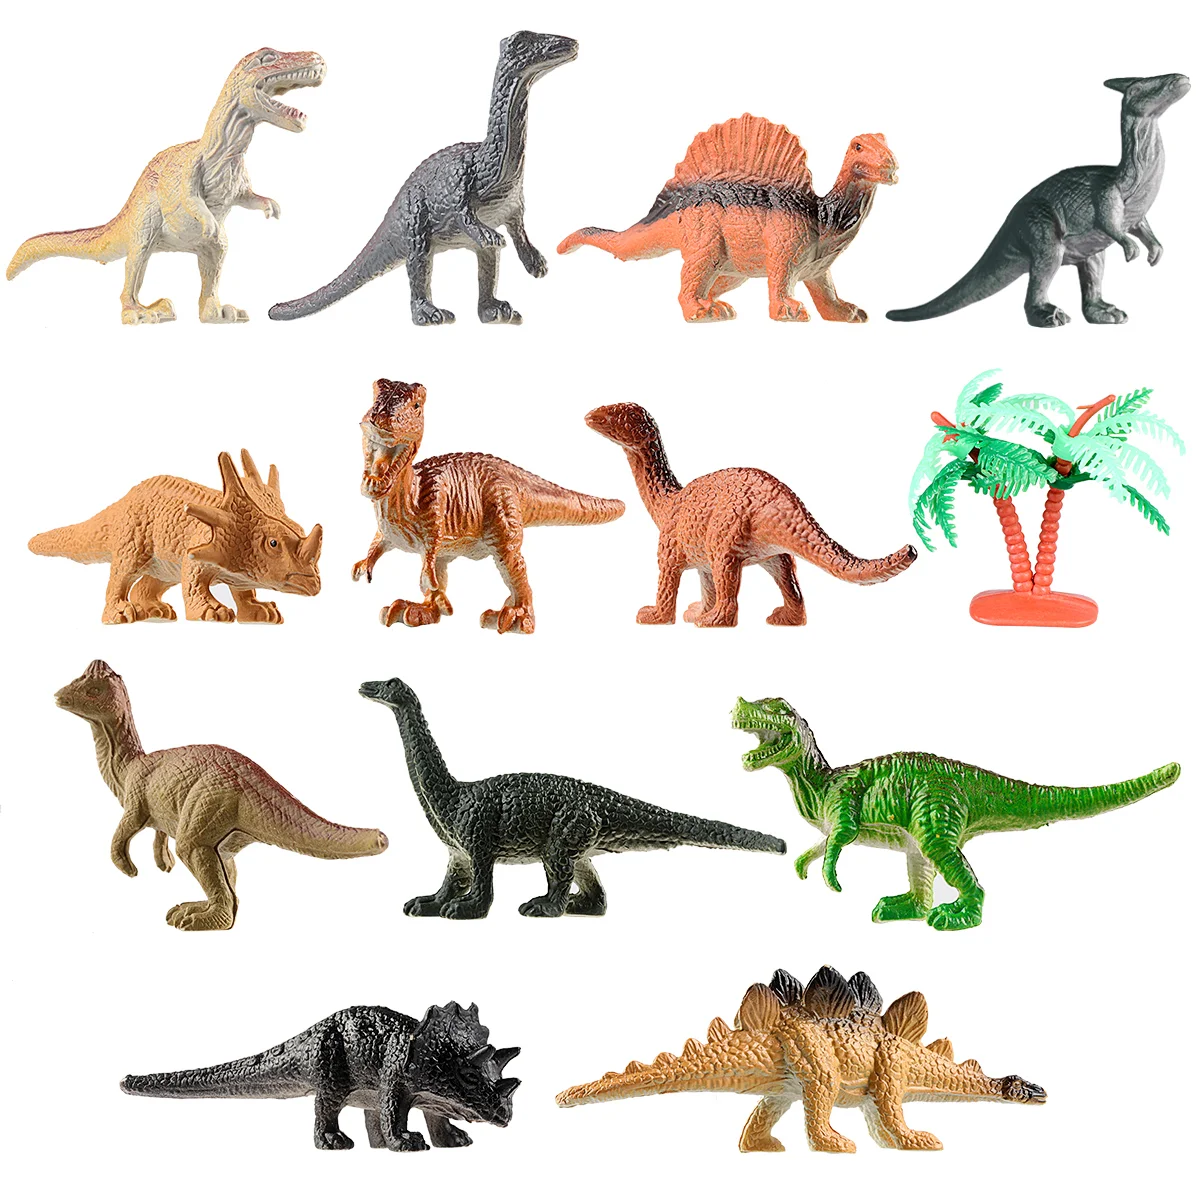 

TOYMYTOY 12 Pcs Mini Dinosaur Toy Set Realistic Toy Dinosaur Figures for Kids and Toddler Education